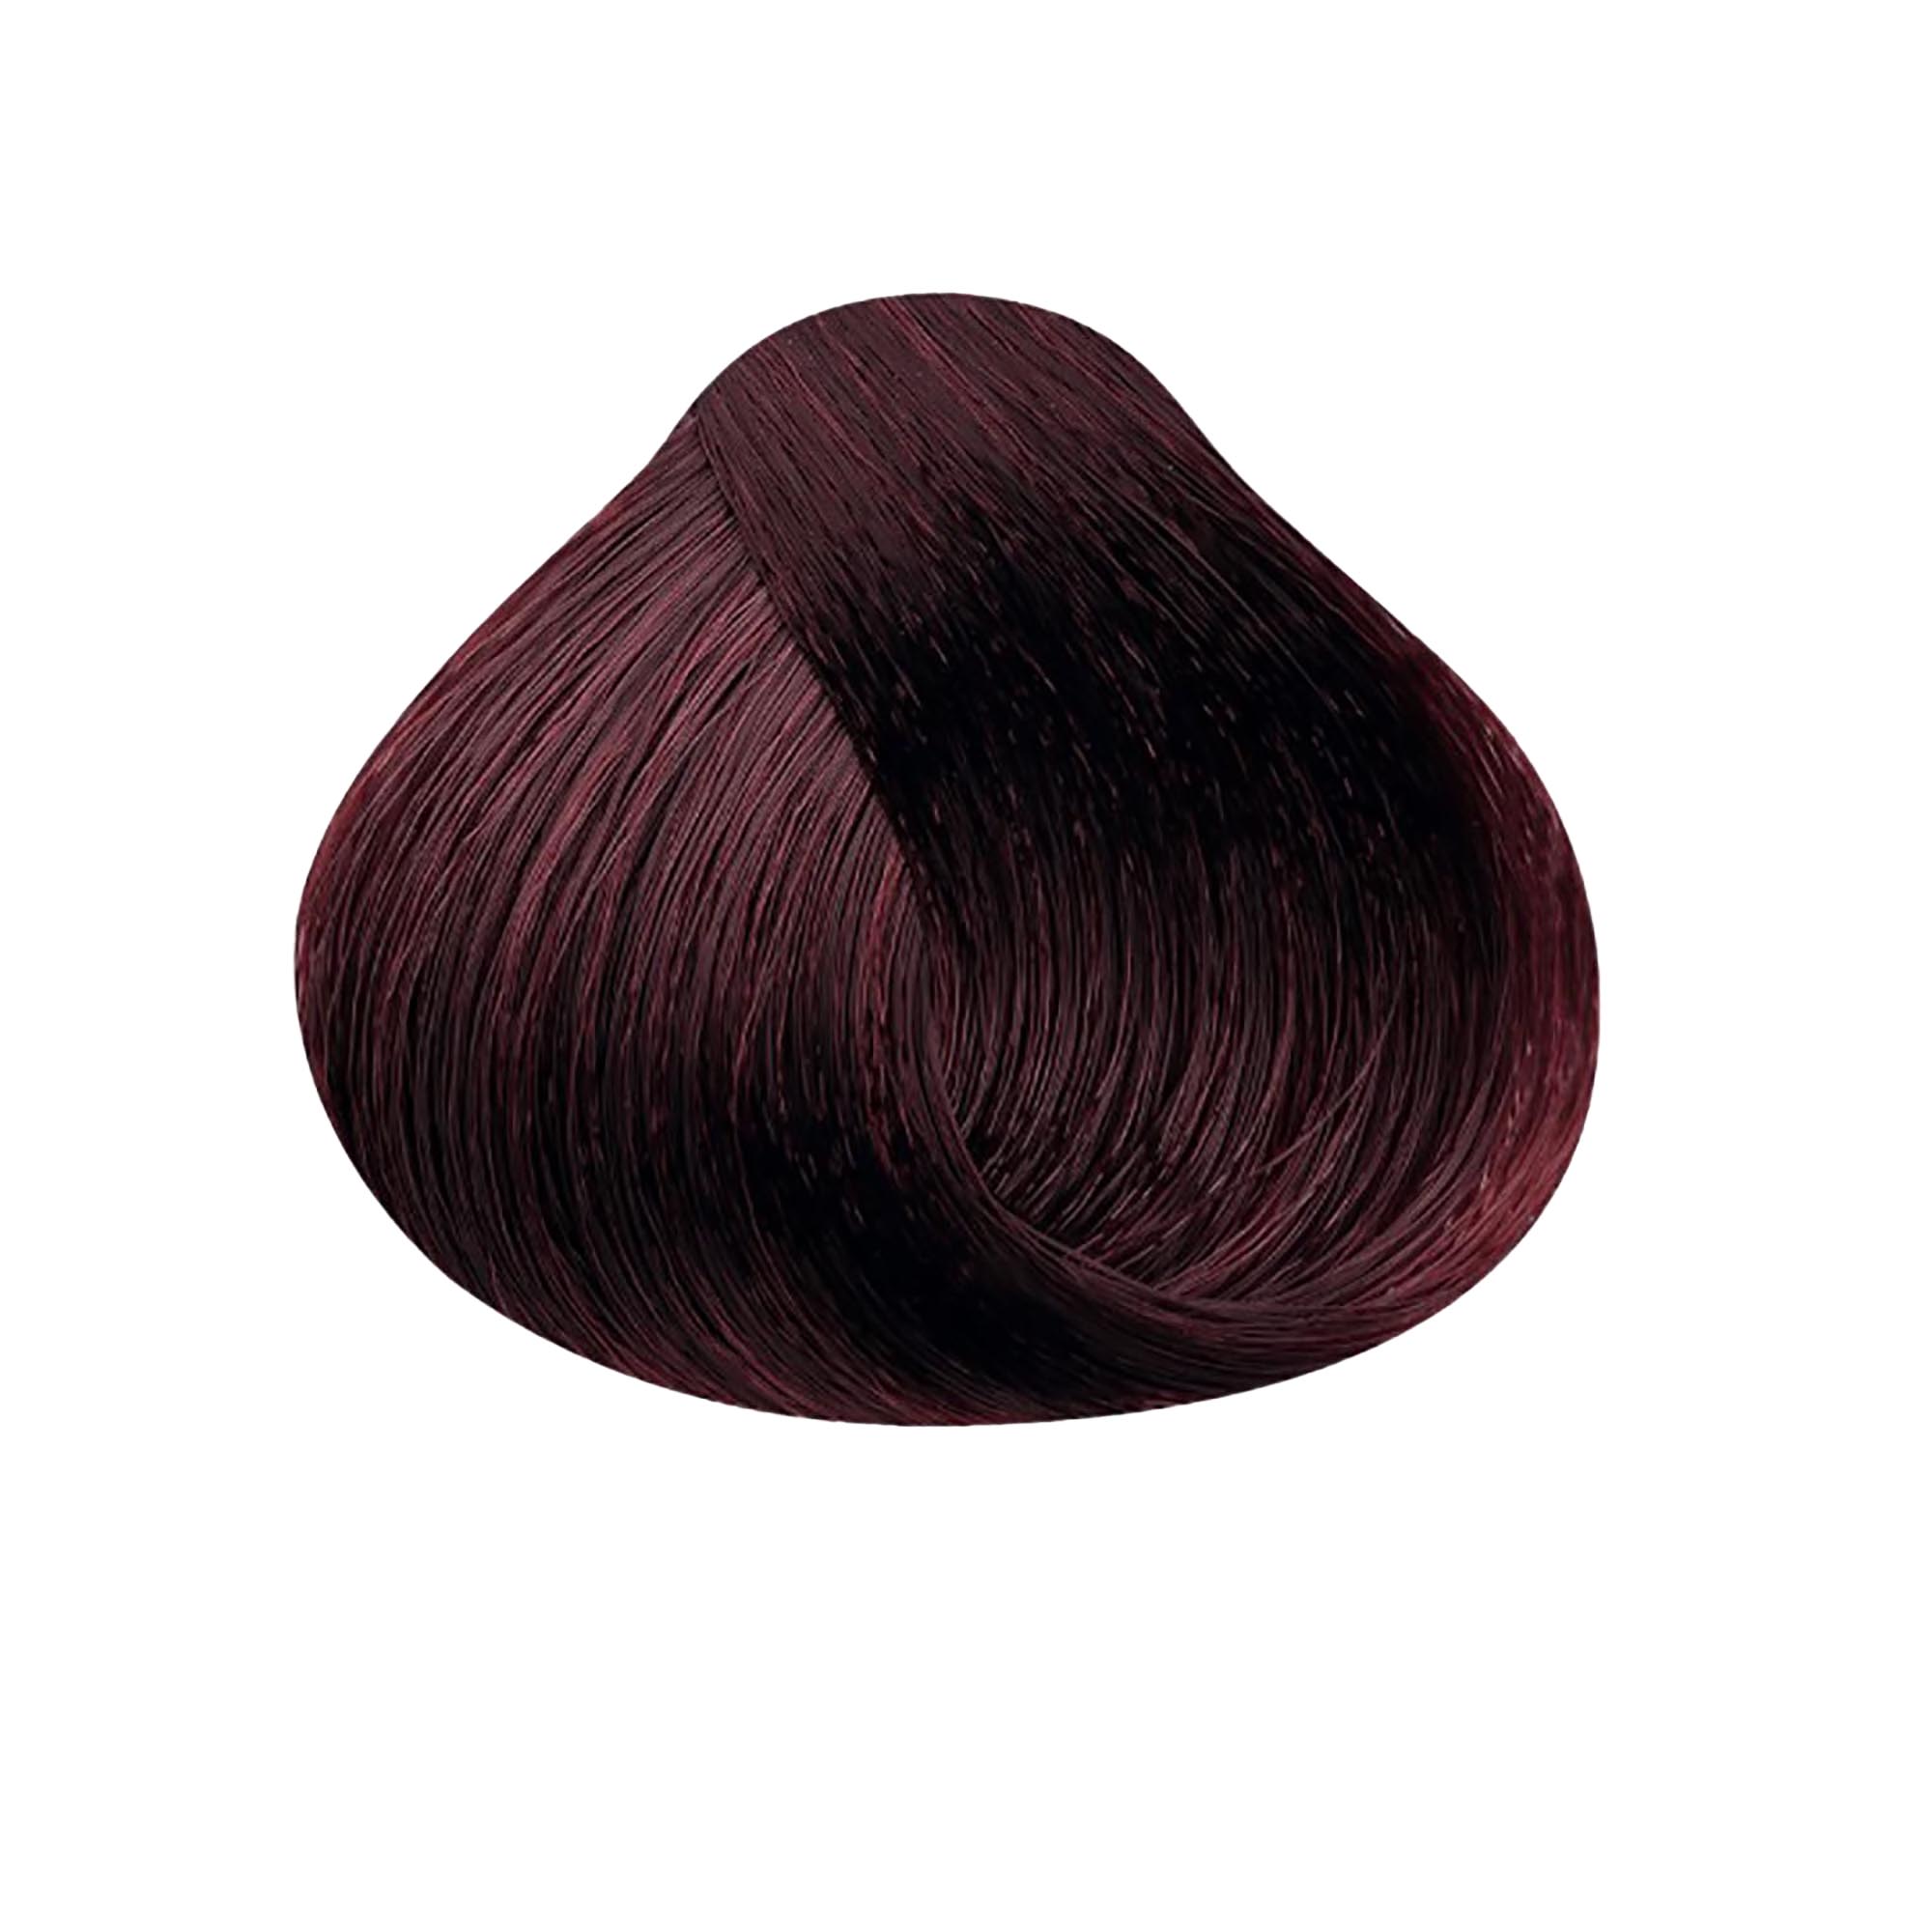 Satin Professional Hair Color / 4MR Red Mahogany Chestnut